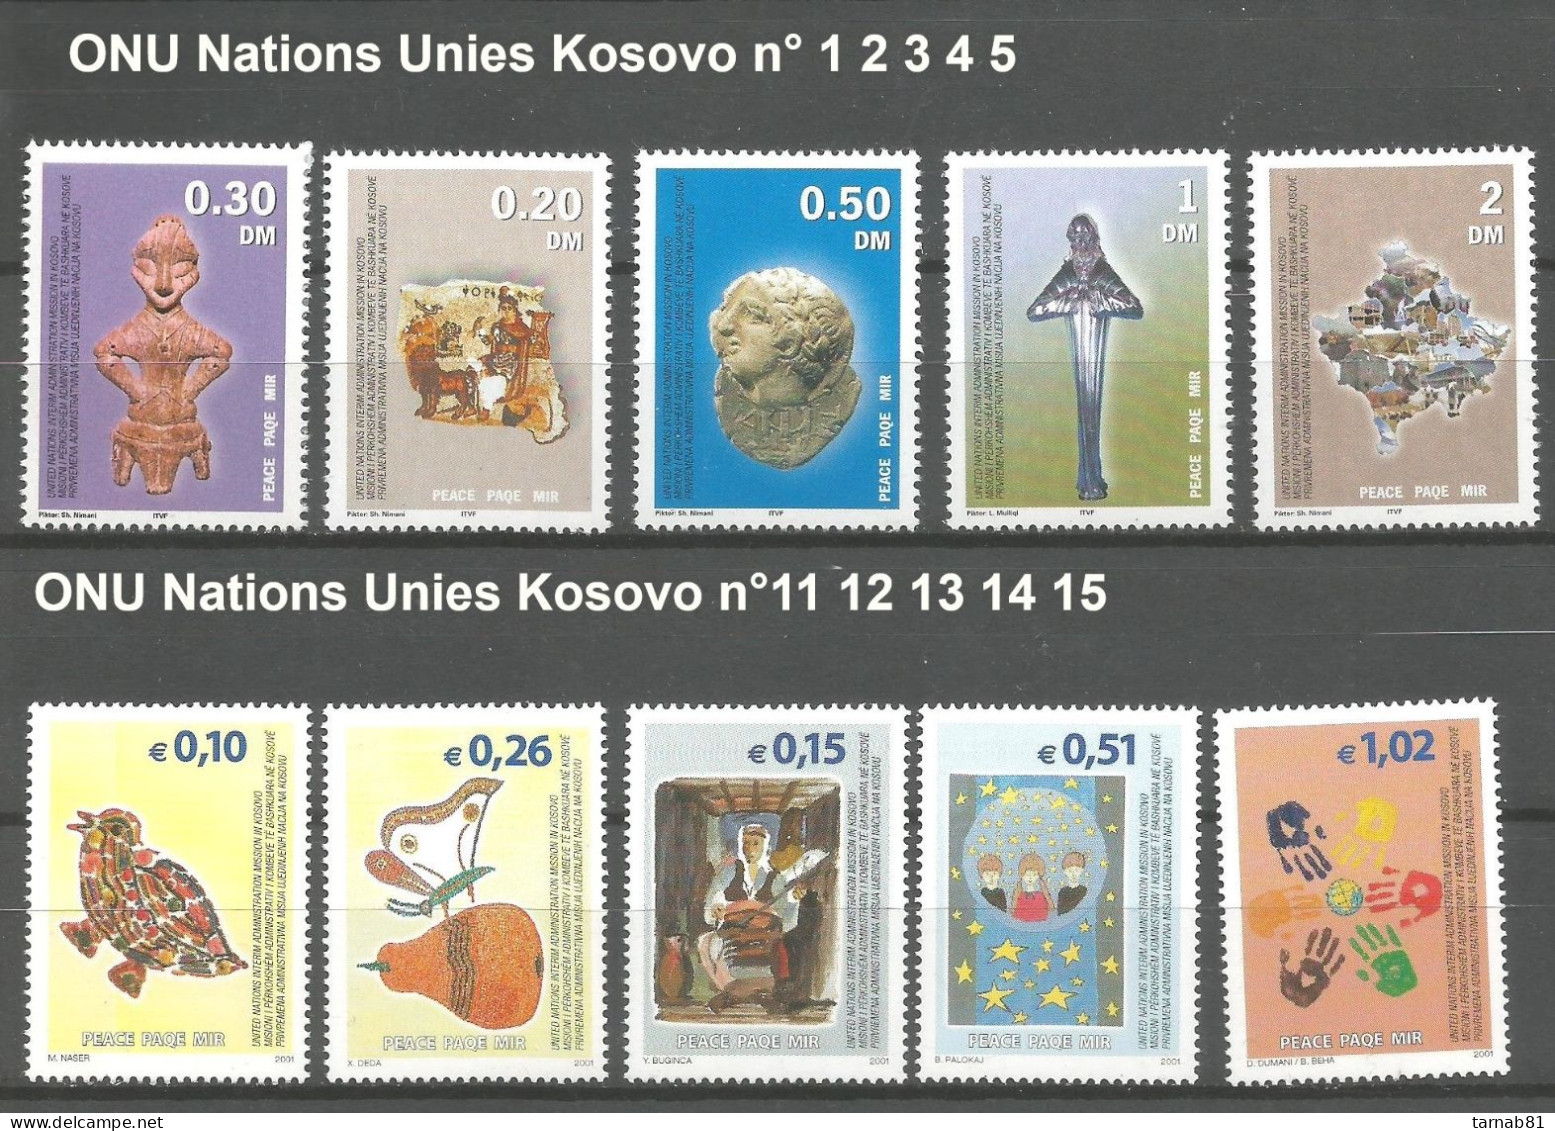 ONU Nations Unies Kosovo Timbres Neufs ** N°1 2 3 4 5 Et  11 12 13 14 15  Années 2000 Et 2002 - Unused Stamps